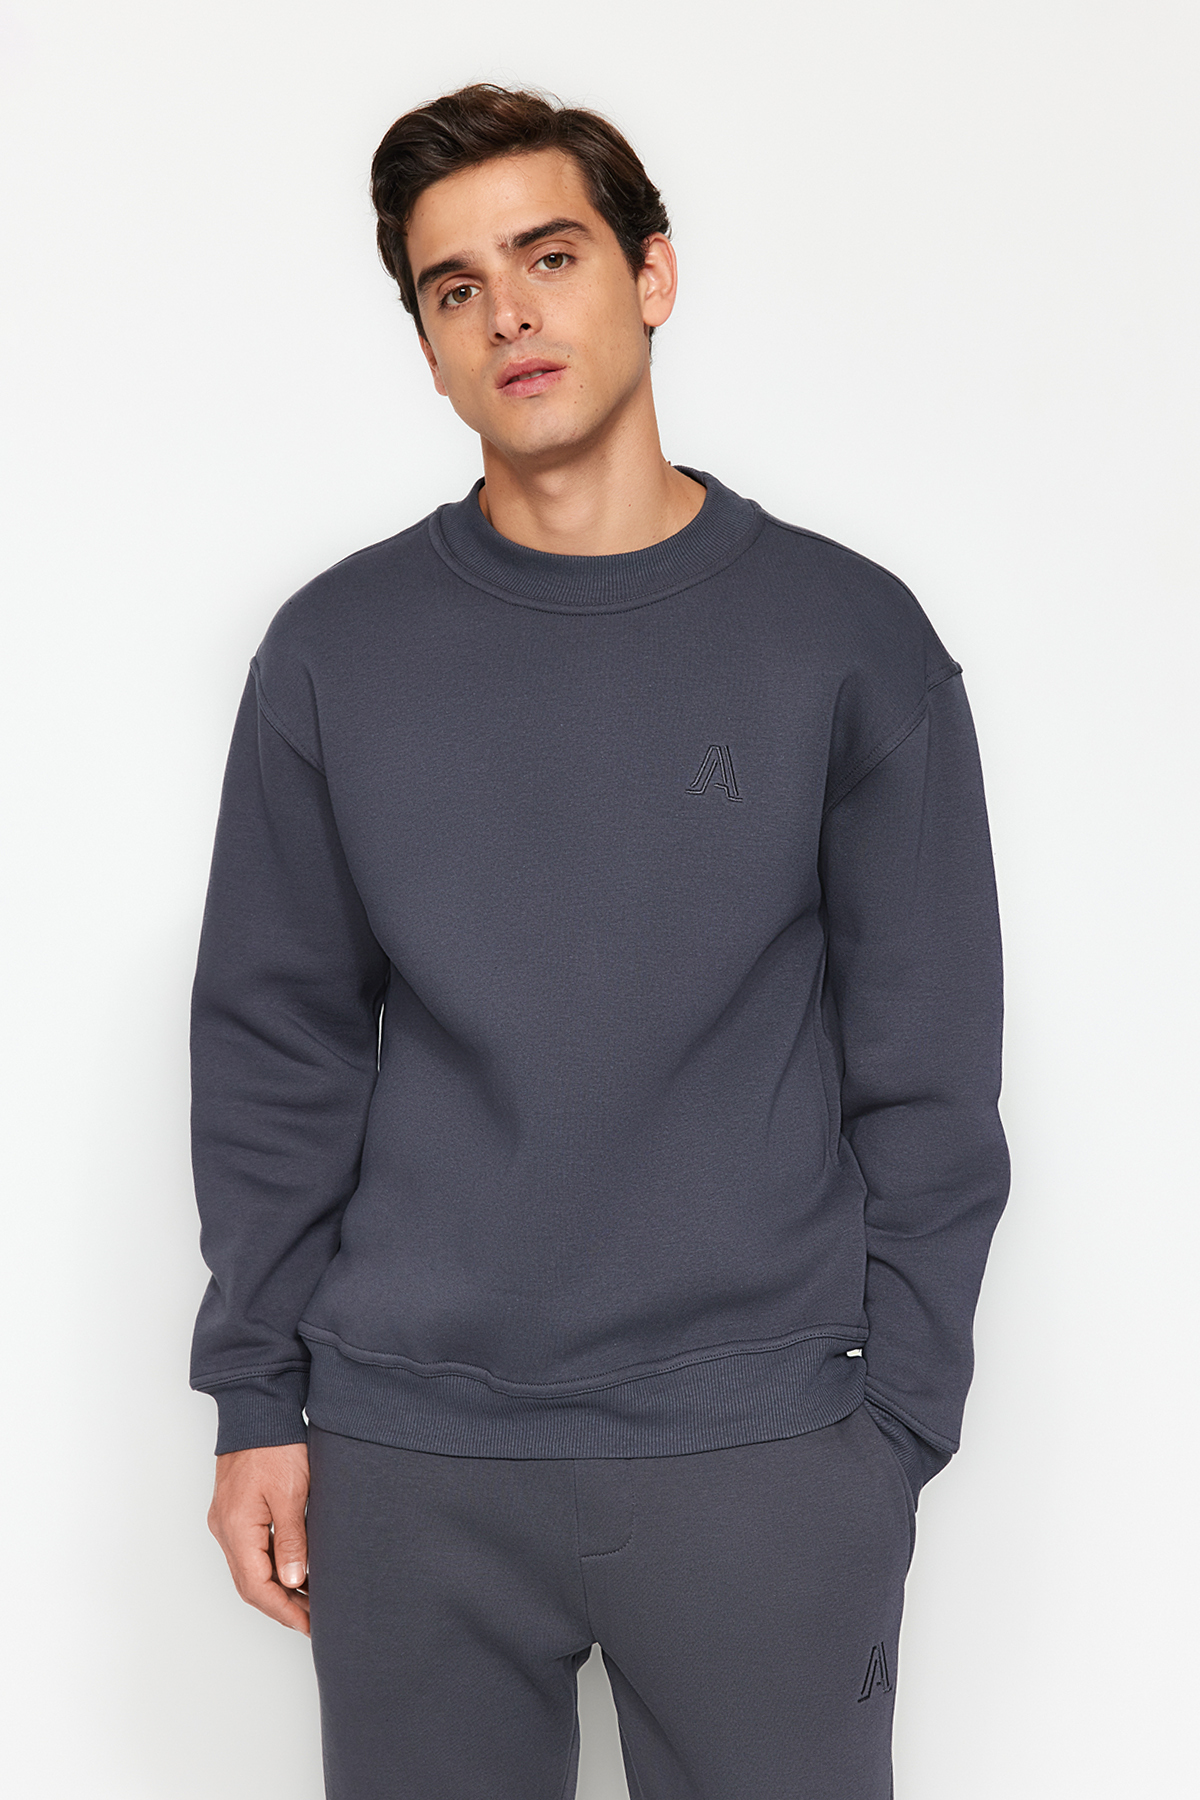 Trendyol Anthracite Men's Relaxed/Comfortable Fit Half Turtleneck Letter Embroidered Cotton Thick Sweatshirt.